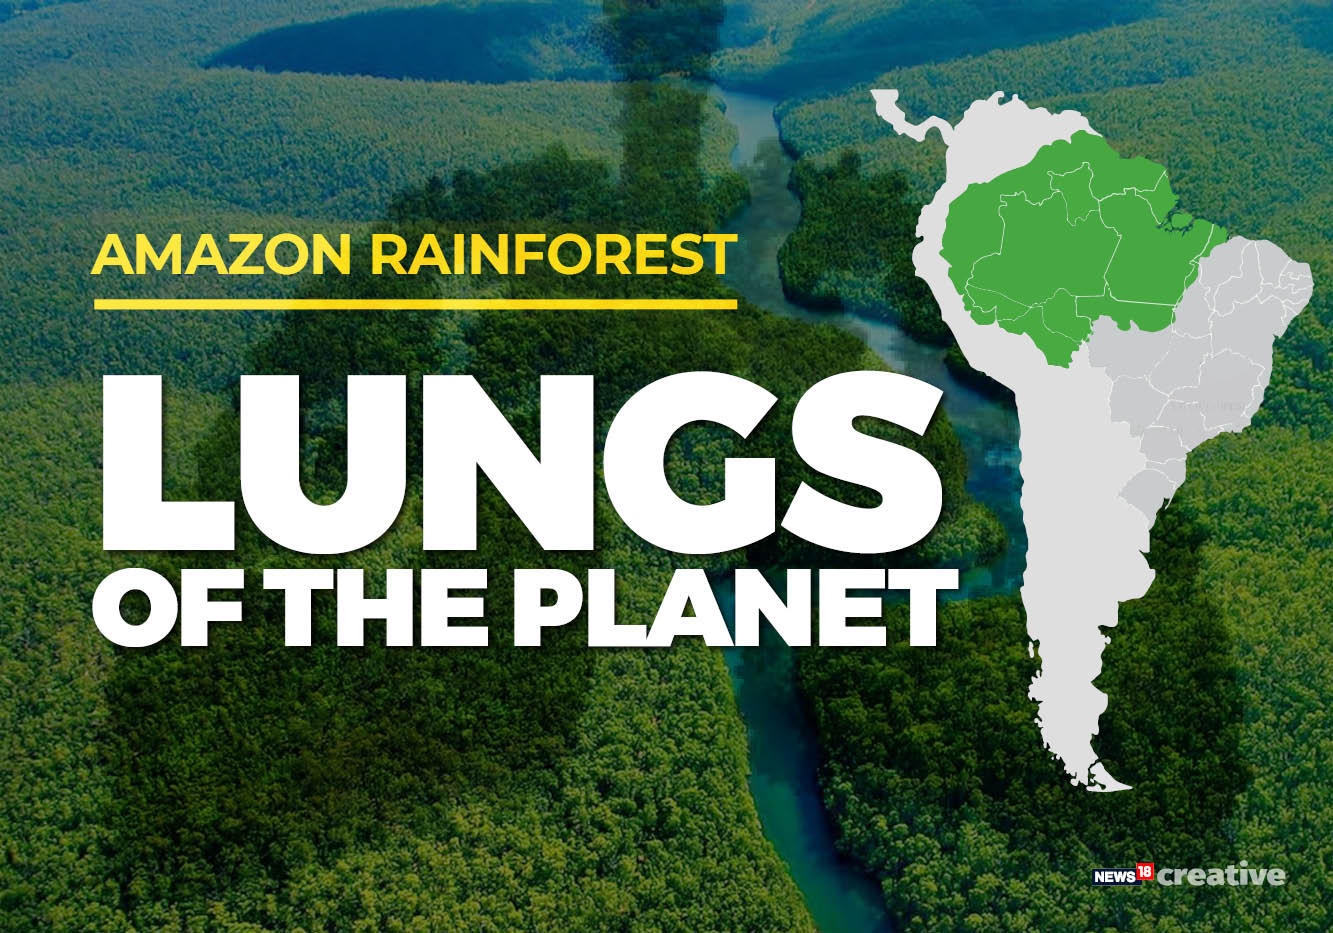 Amazon Rainforest Fire: Why Amazon Forest Is Lungs Of The Planet